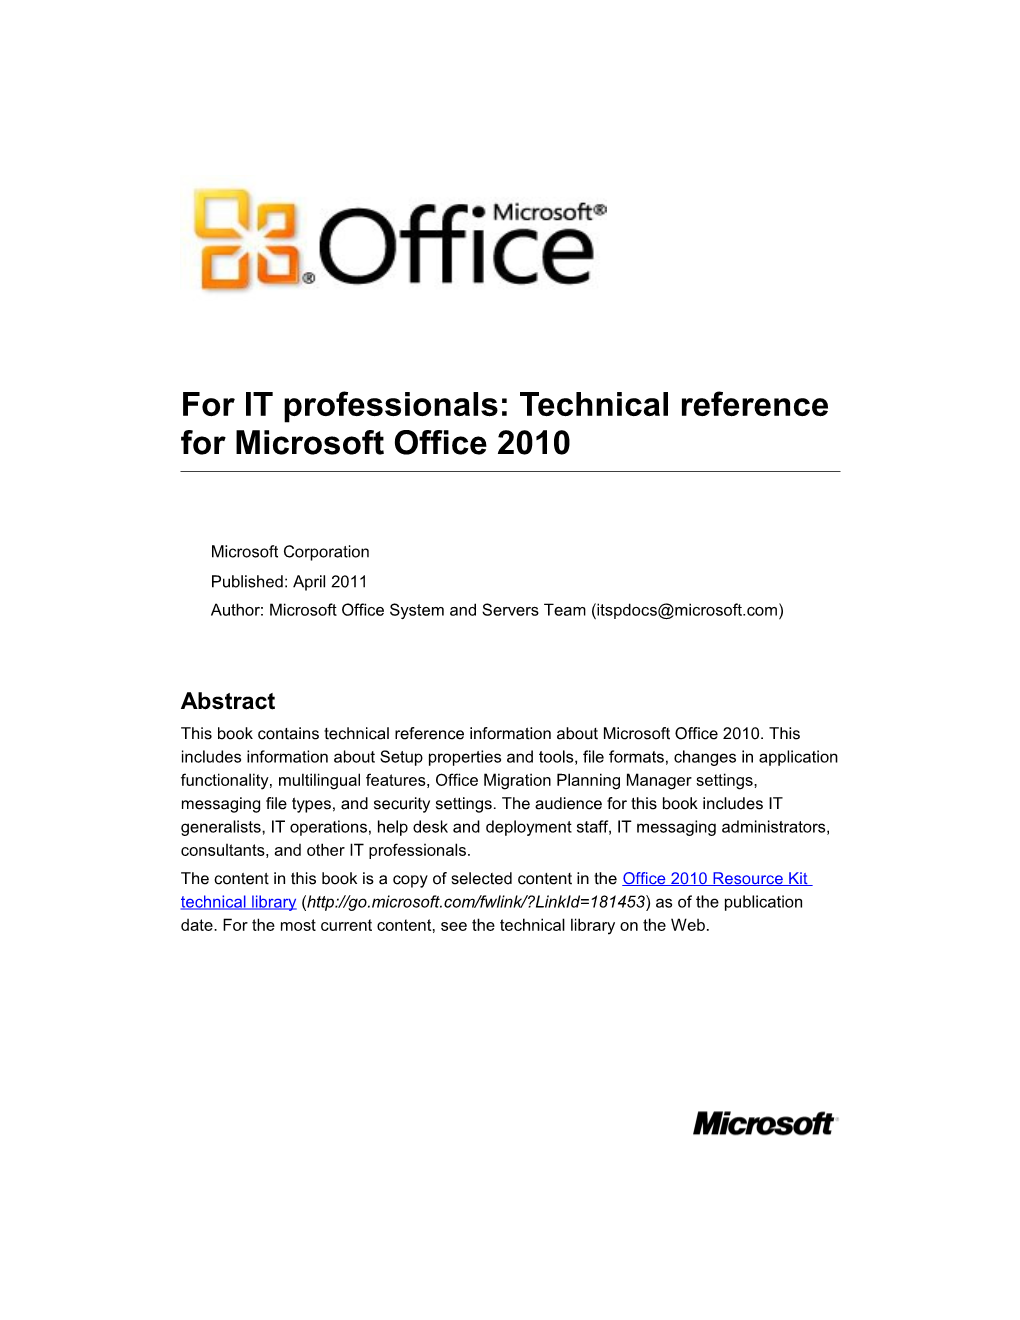 For IT Professionals: Technical Reference for Microsoft Office 2010